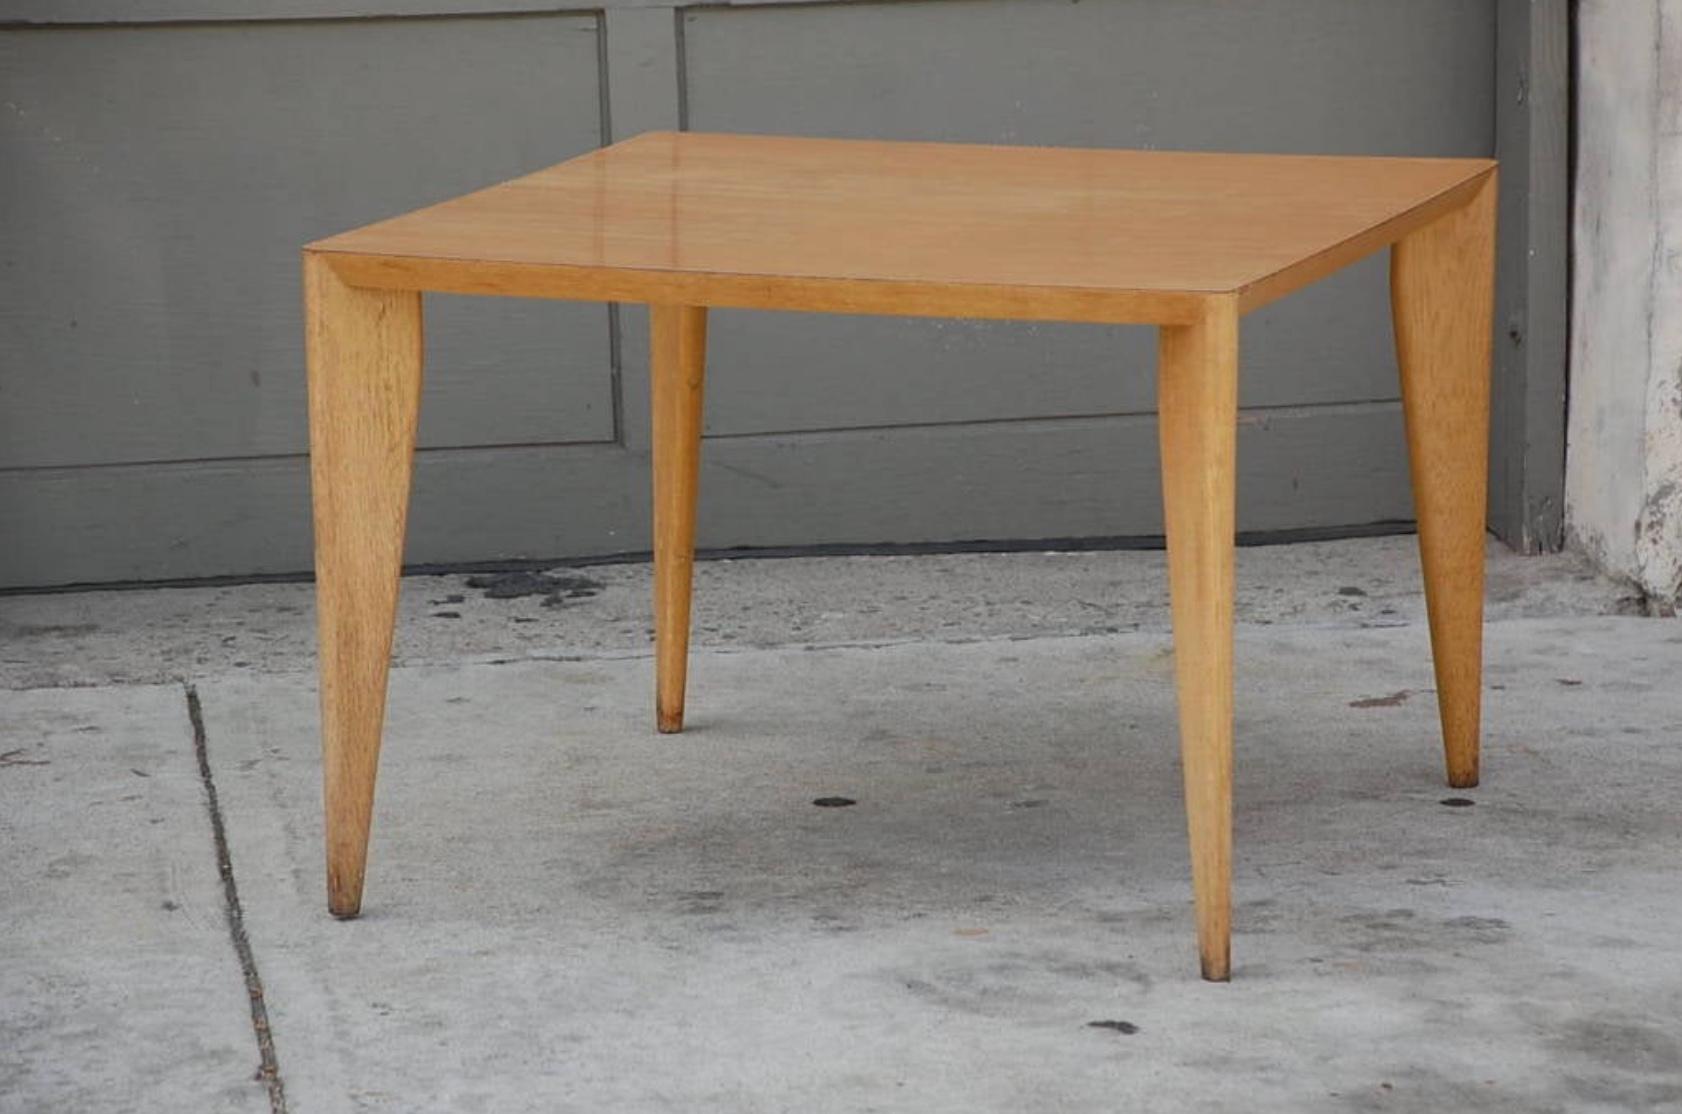 Bleached wood modernist coffee/side table.